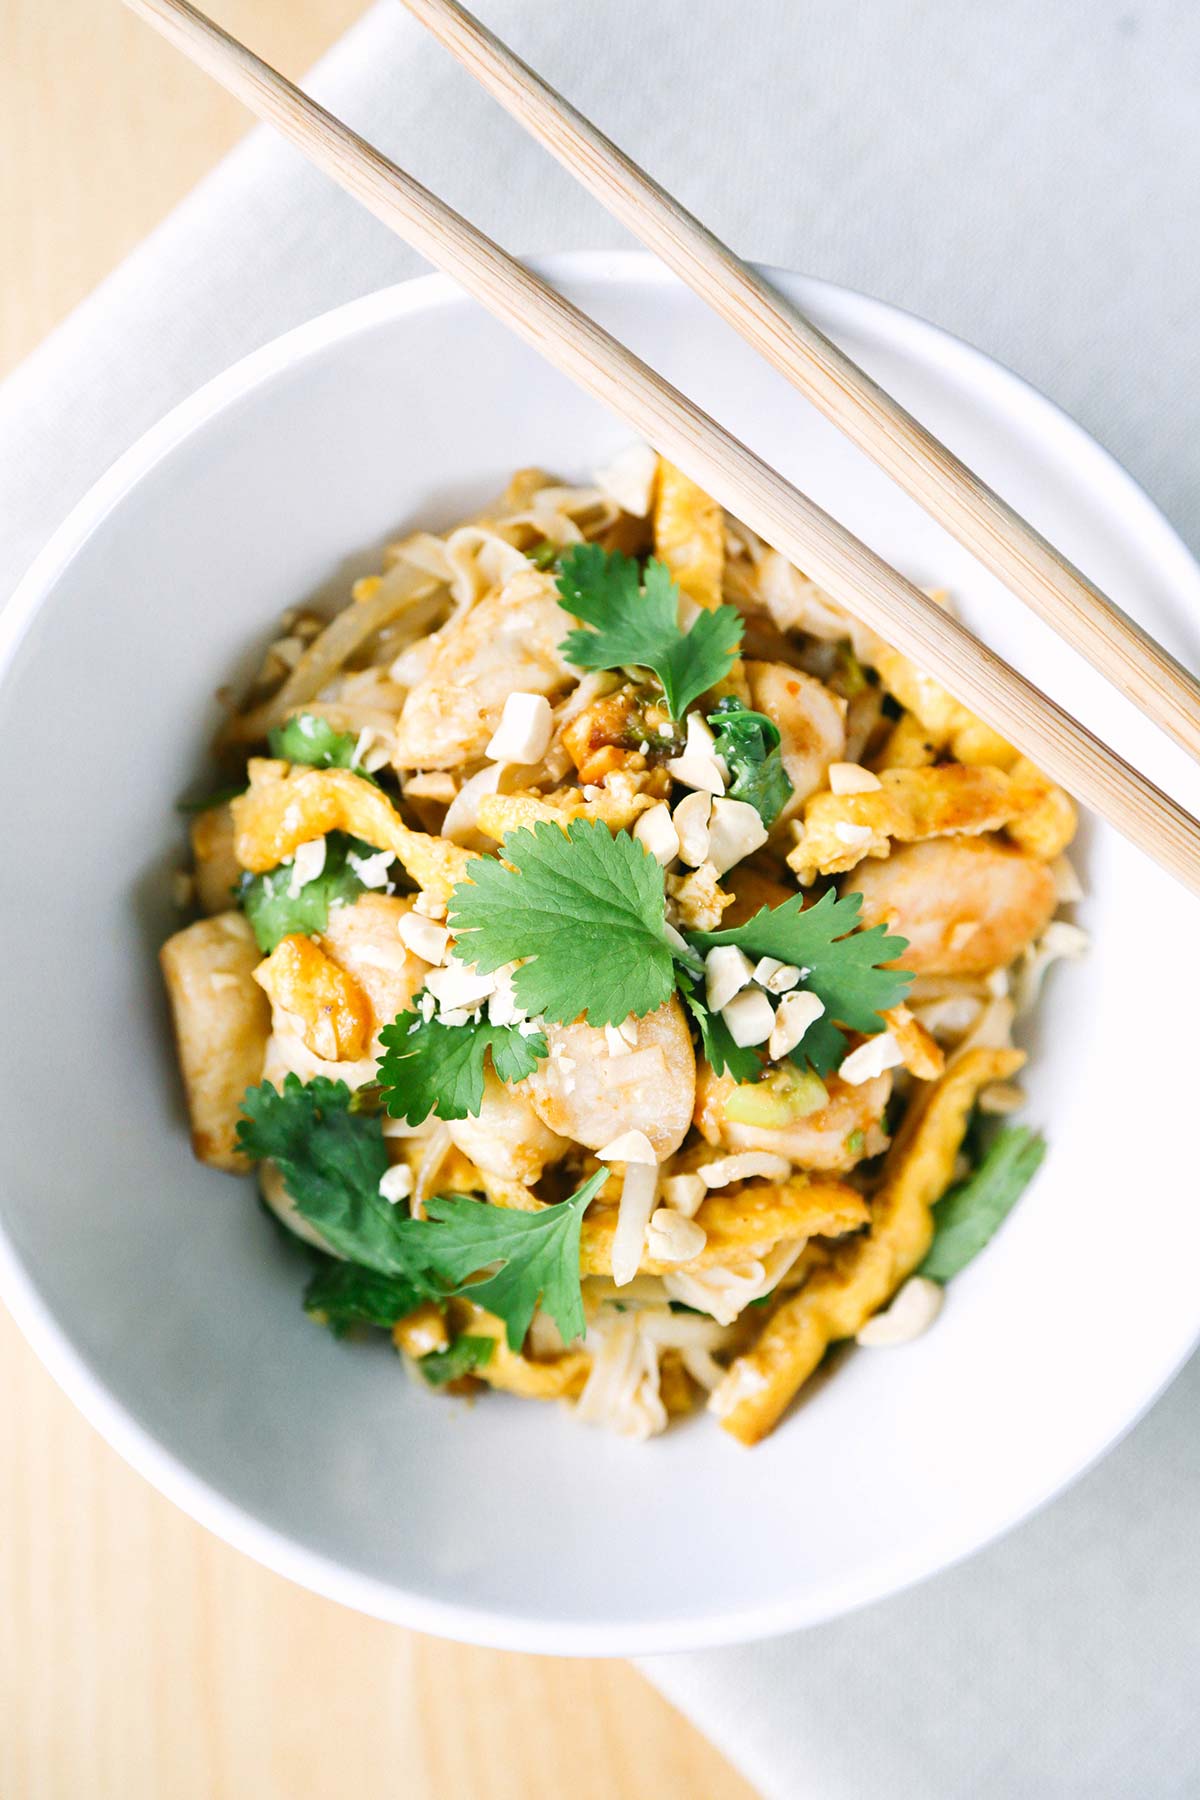 Keto pad thai recipe for low carb. Uses shirataki noodles with chicken.